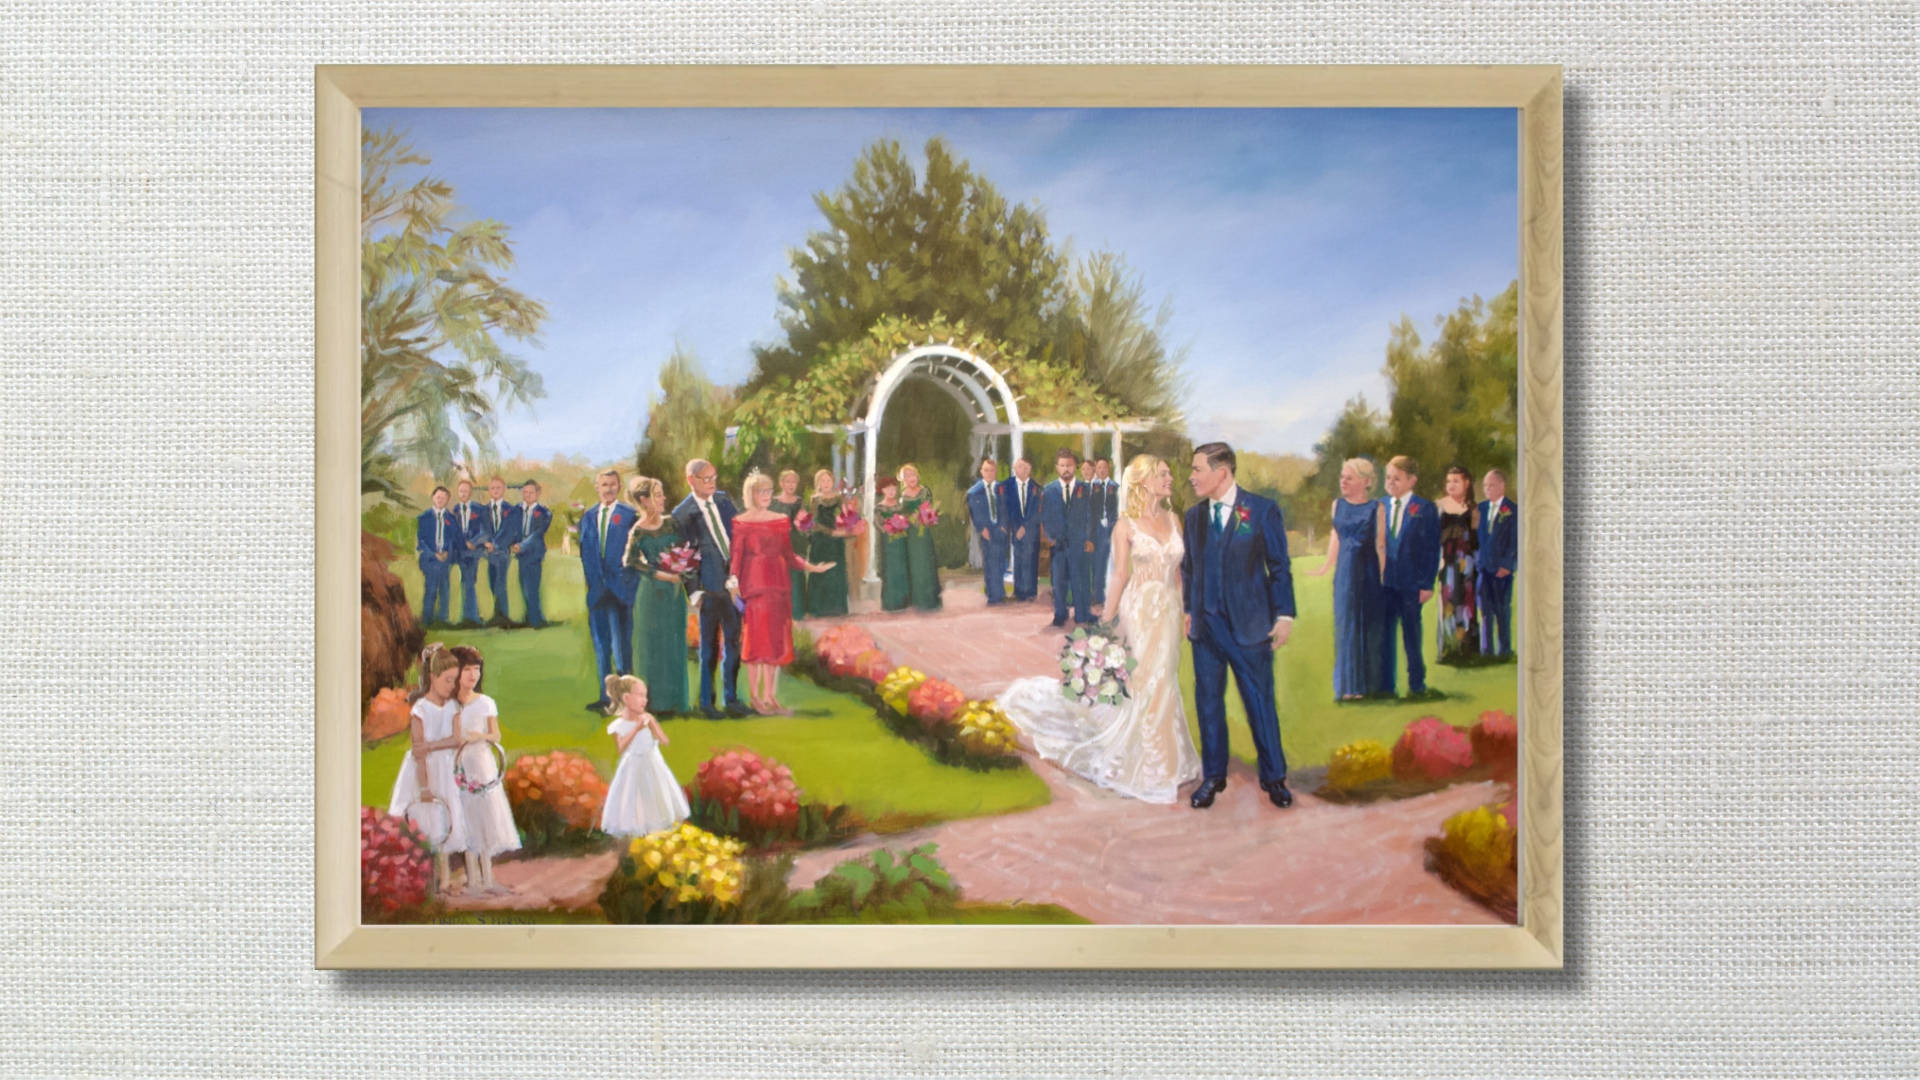 Long Island Wedding Painting framed in a light wood frame on a linen background painted by Linda Marino